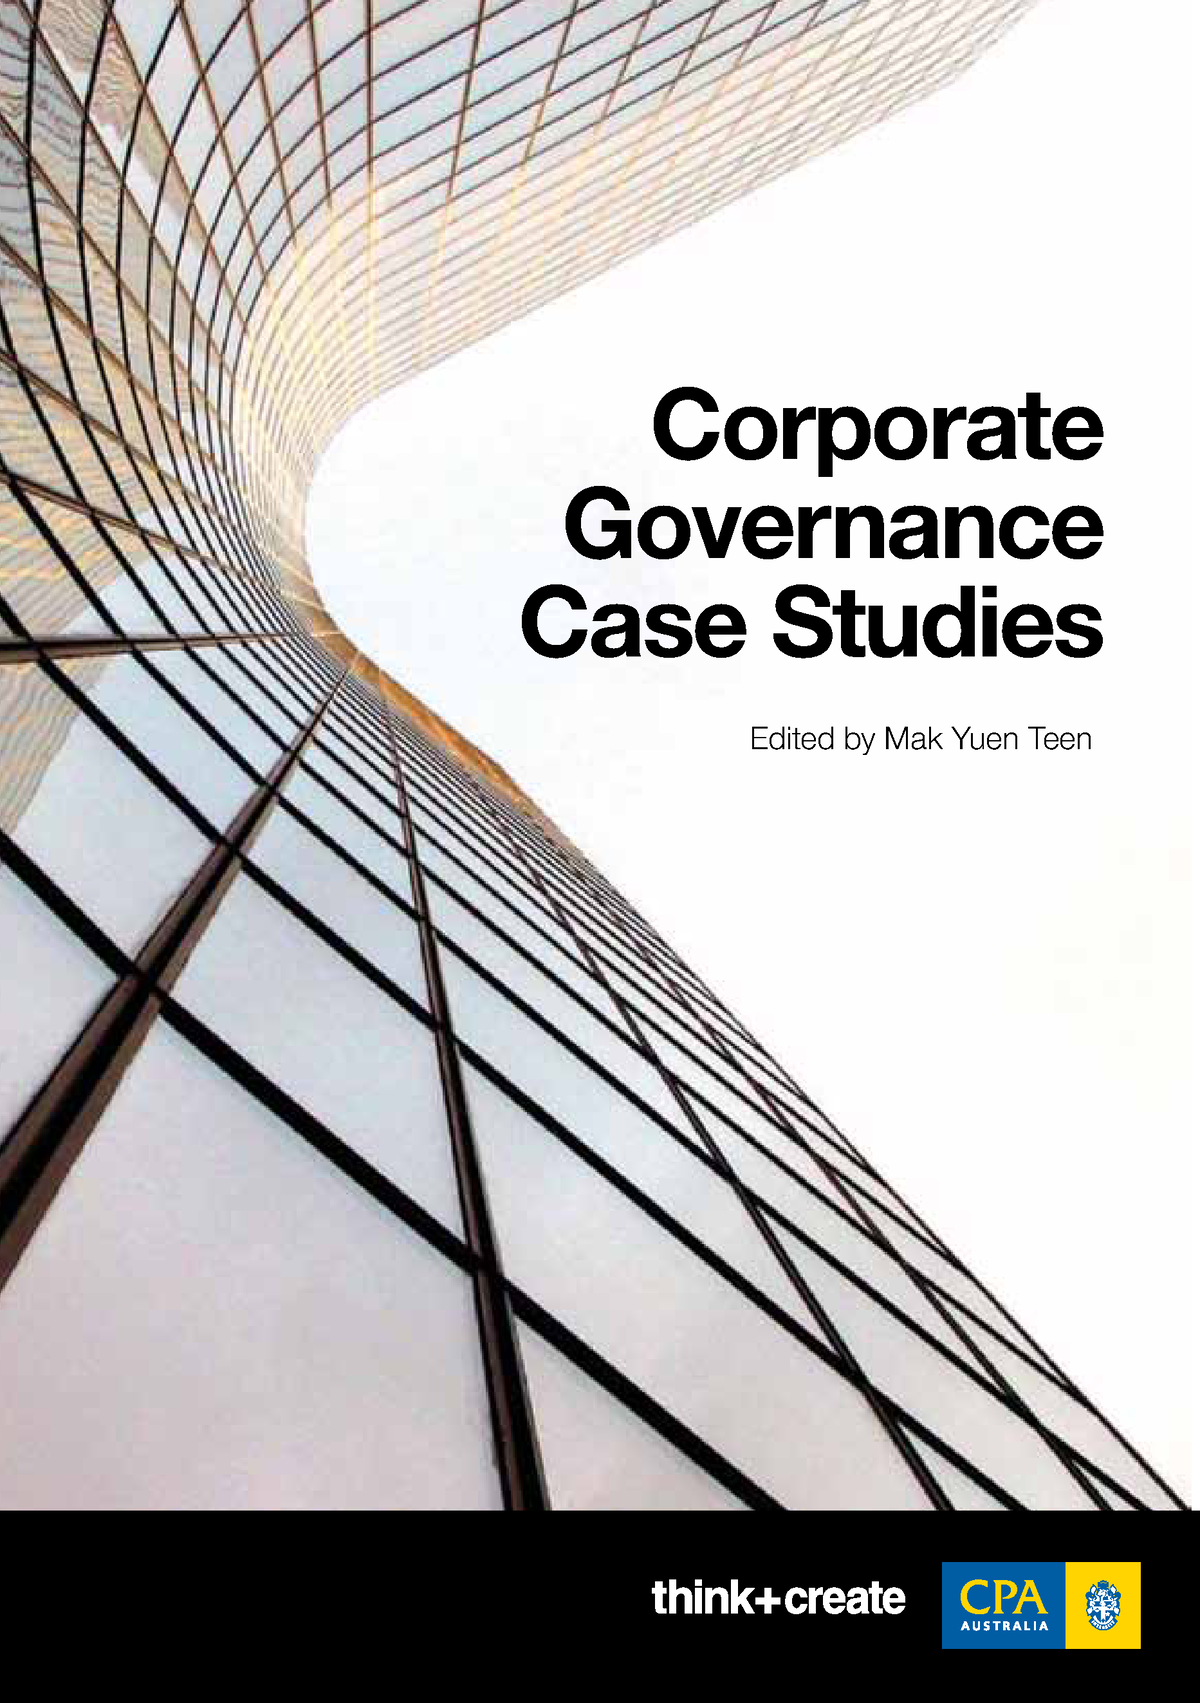 hbs case study corporate governance